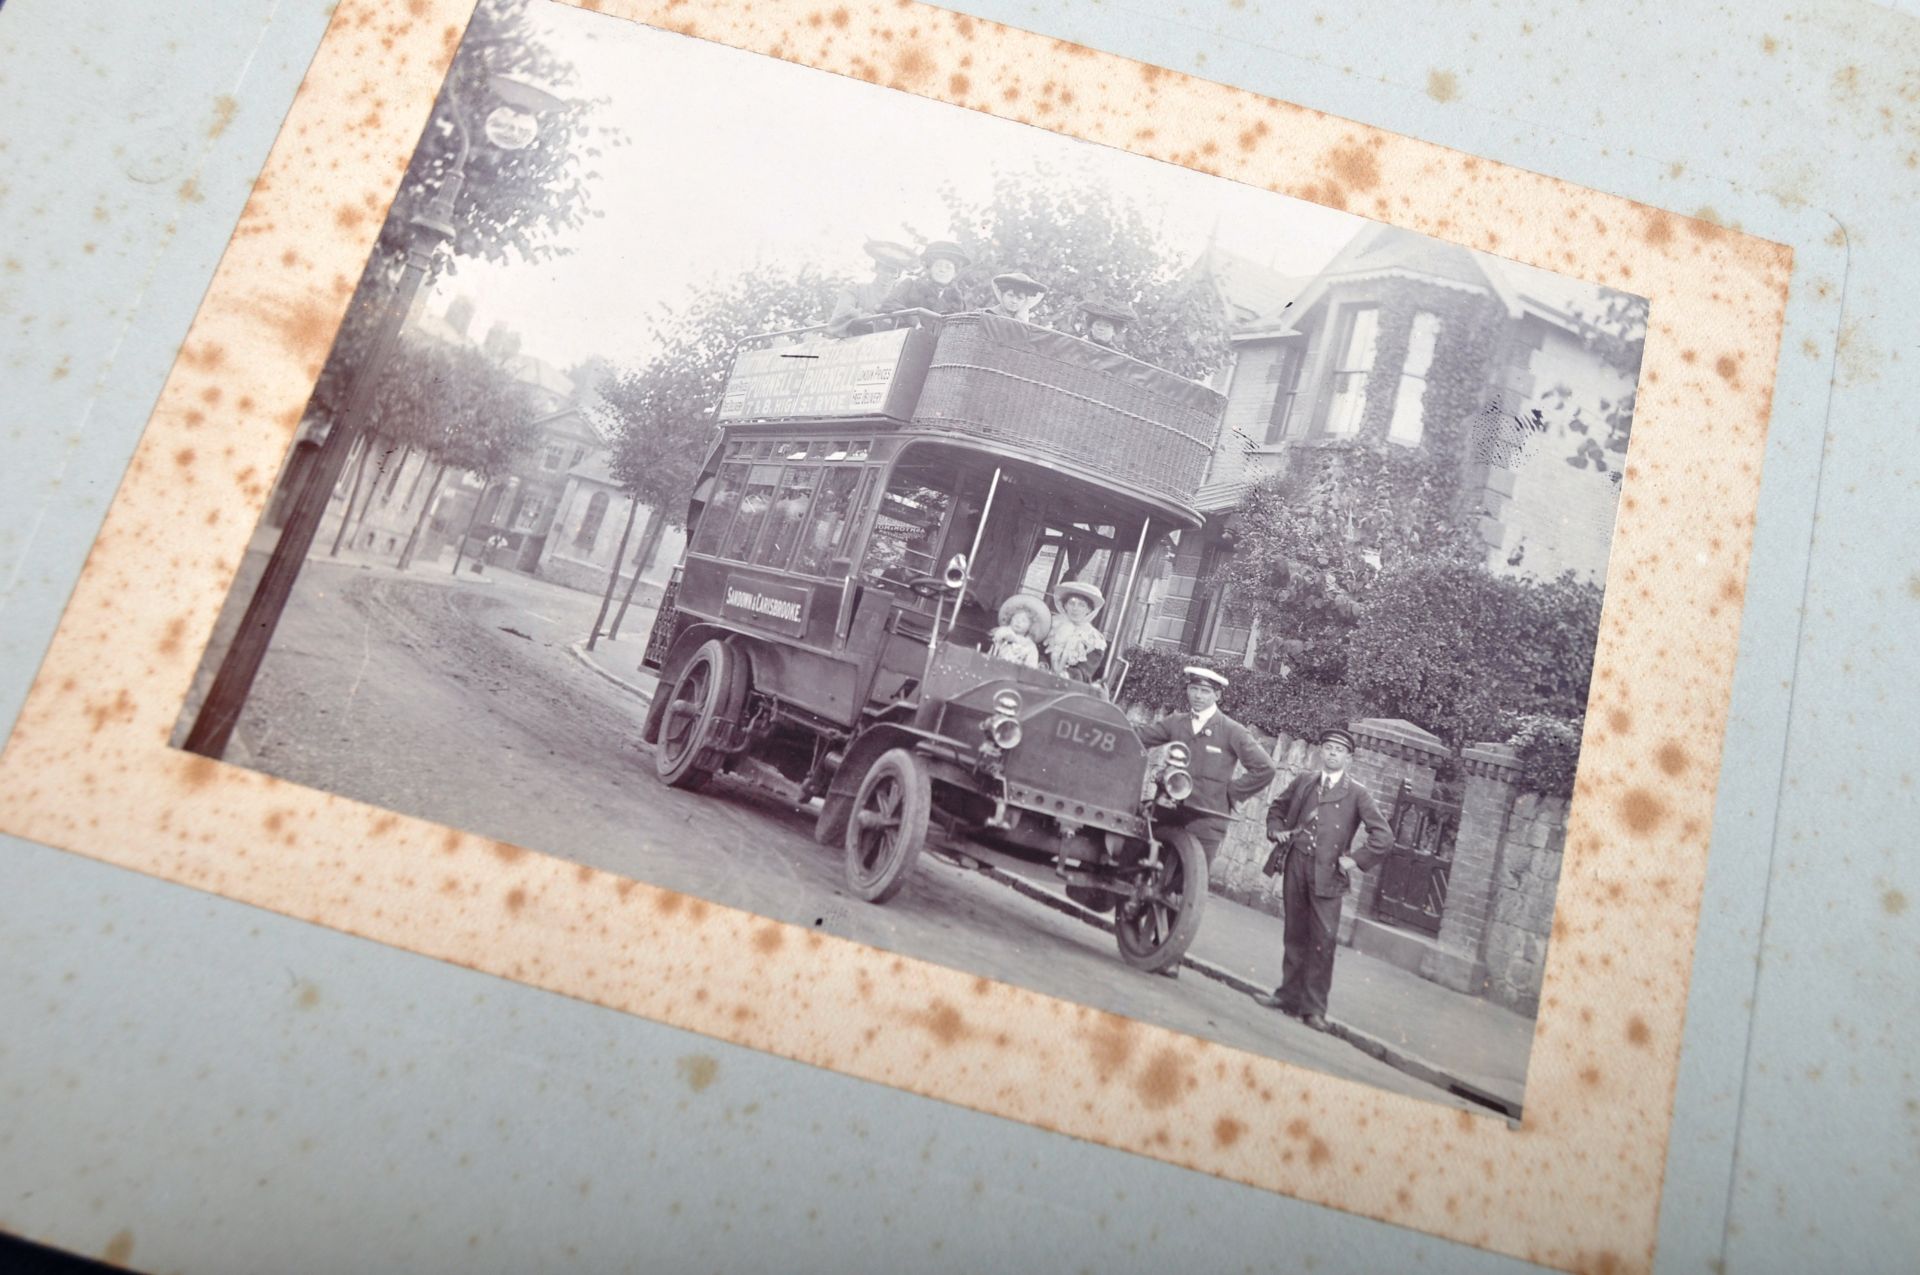 EARLY 20TH CENTURY BUS PHOTOGRAPHS - ISLE OF WIGHT - Image 3 of 7